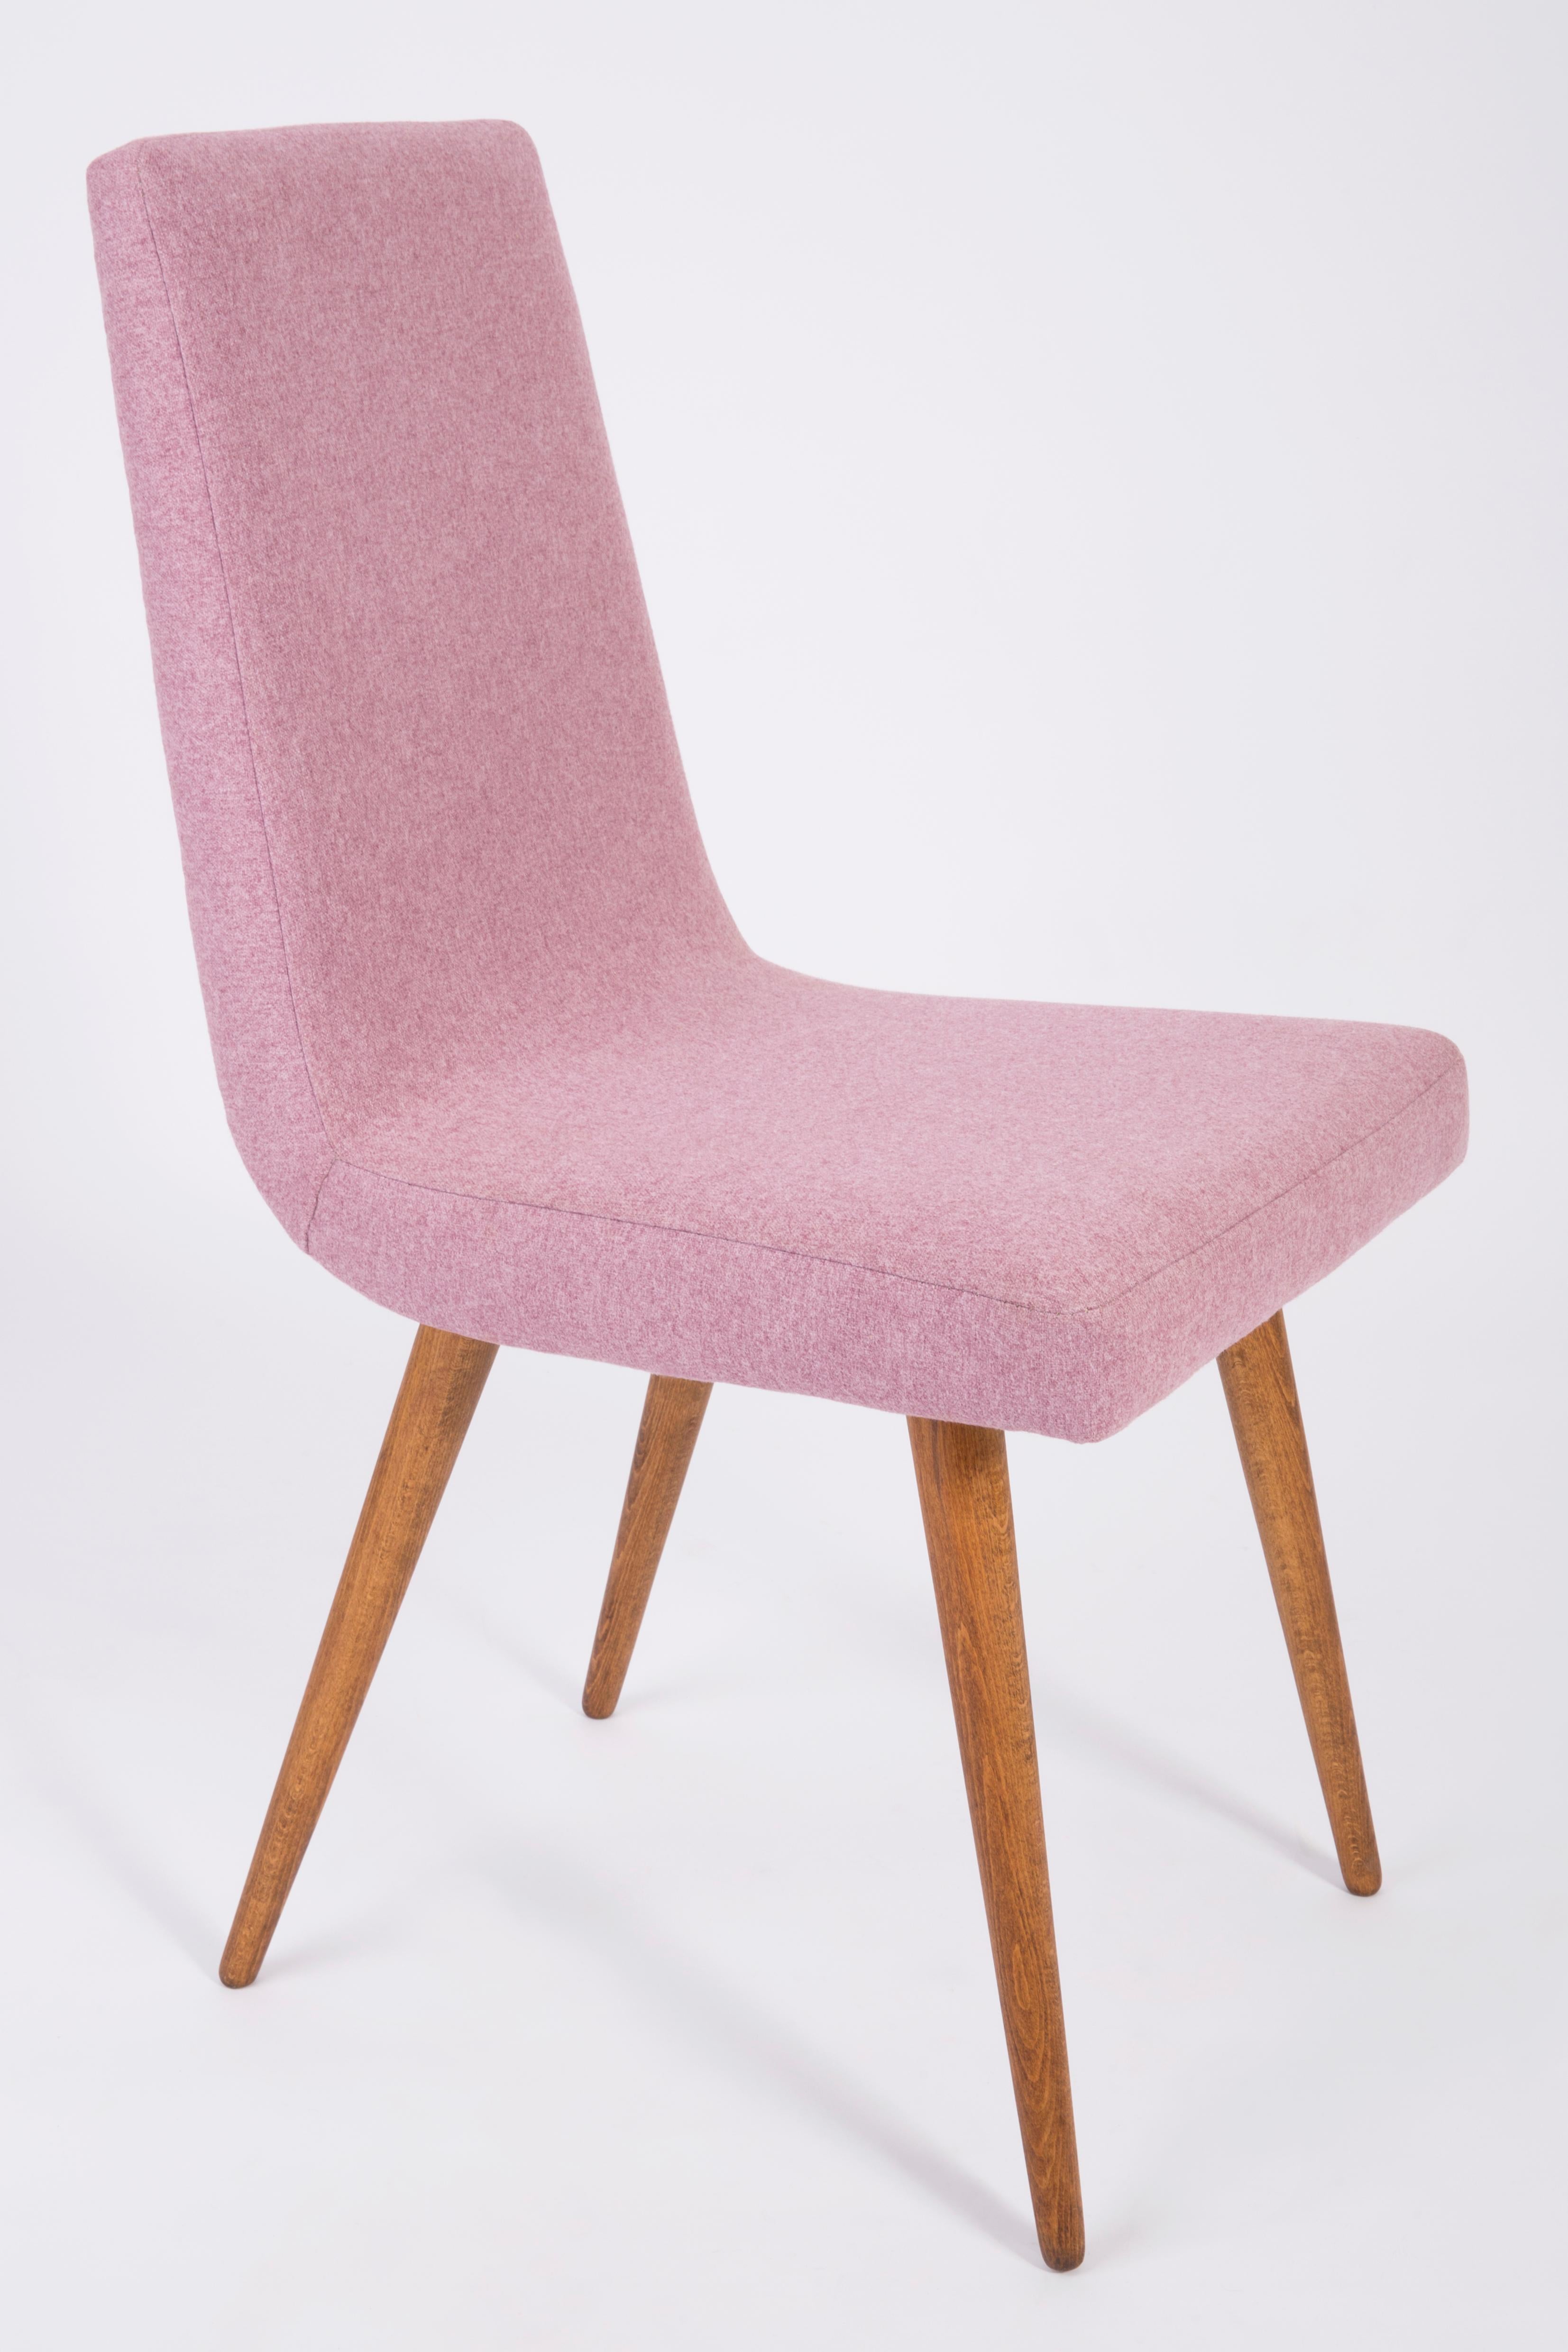 Set of Four Mid-Century Vintage Pink Melange Chairs, Europe, 1960s For Sale 5